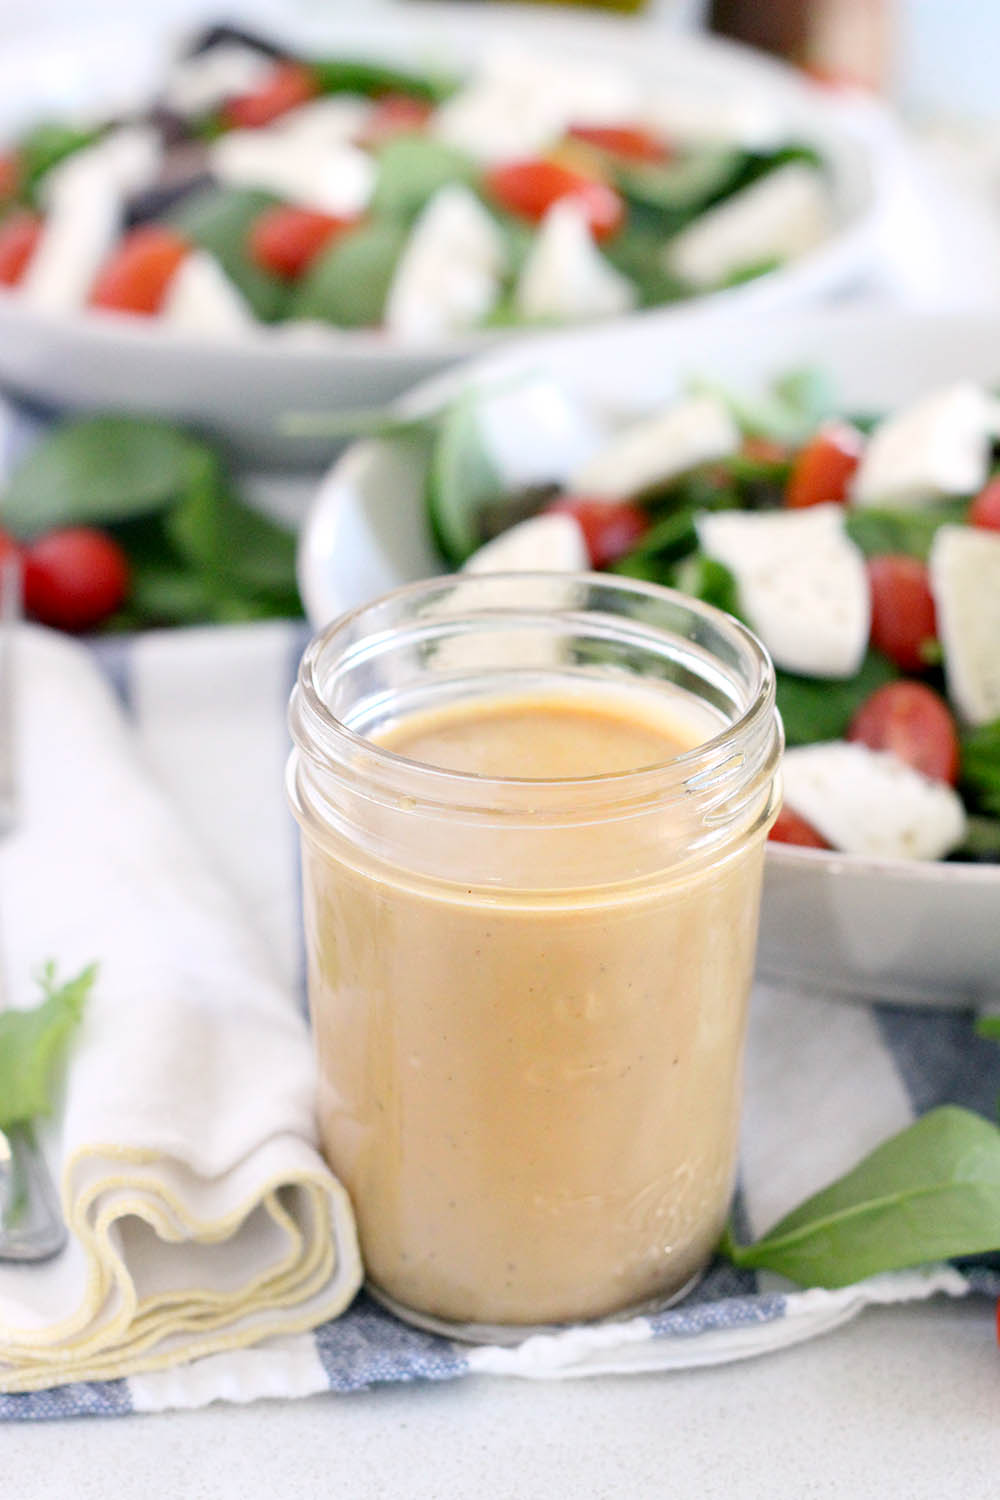 This Creamy Maple Balsamic Dressing is tangy, slightly sweet, and perfectly creamy. It's my new favorite salad dressing recipe! Toss with mixed greens, or drizzle on a Caprese salad. 